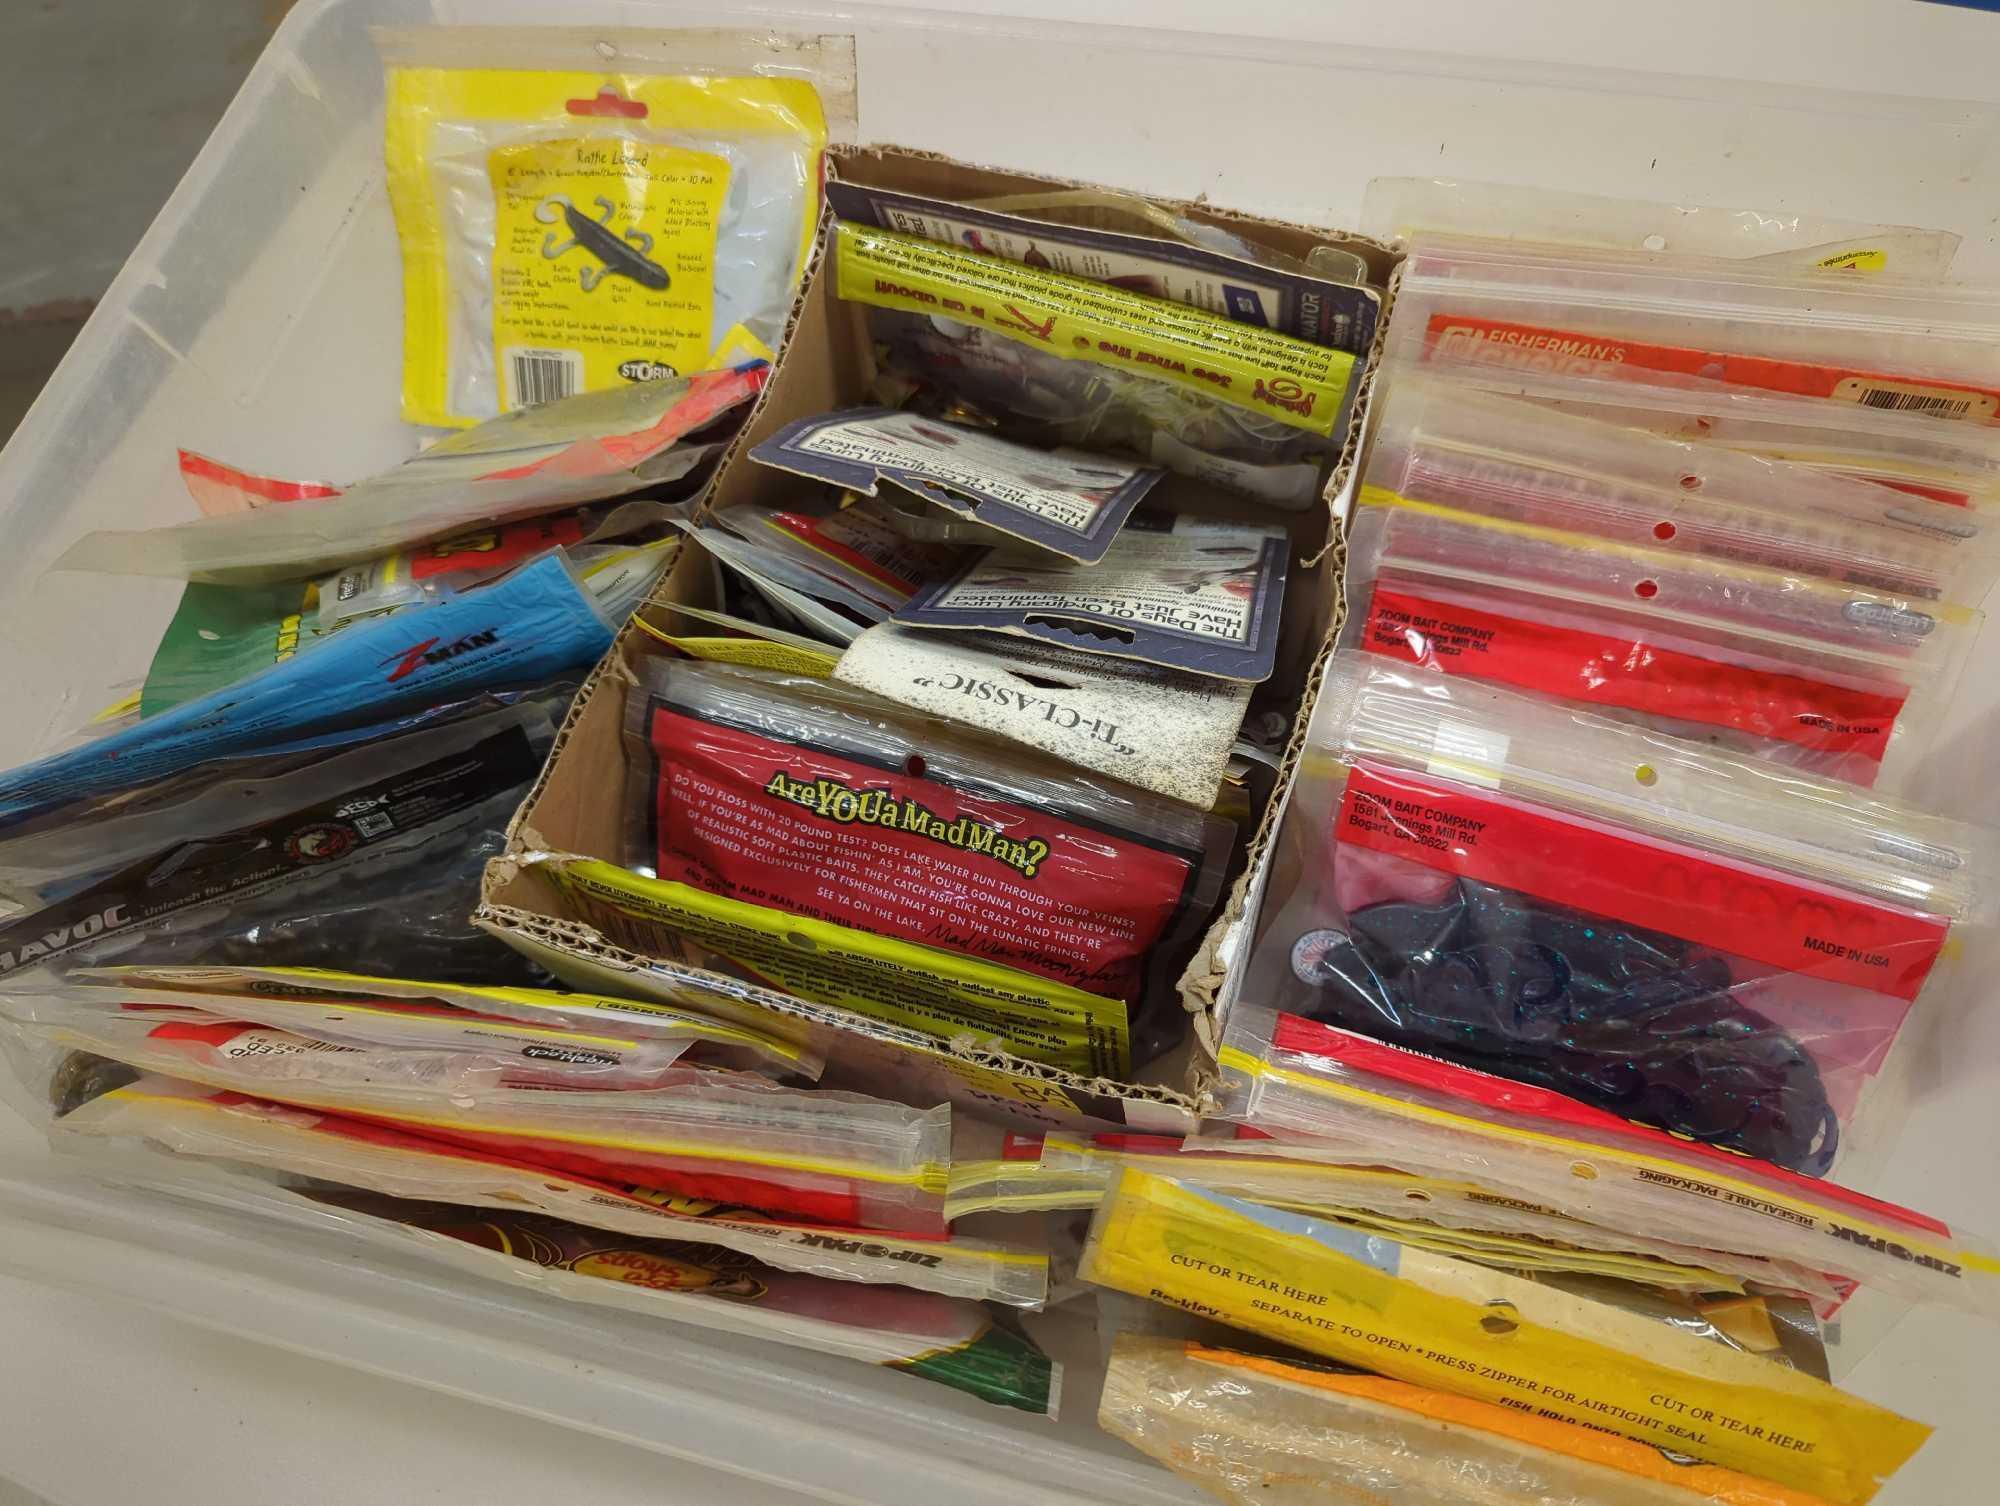 Sterilite organizer tote and contents including worms, other various fishing lures and fishing